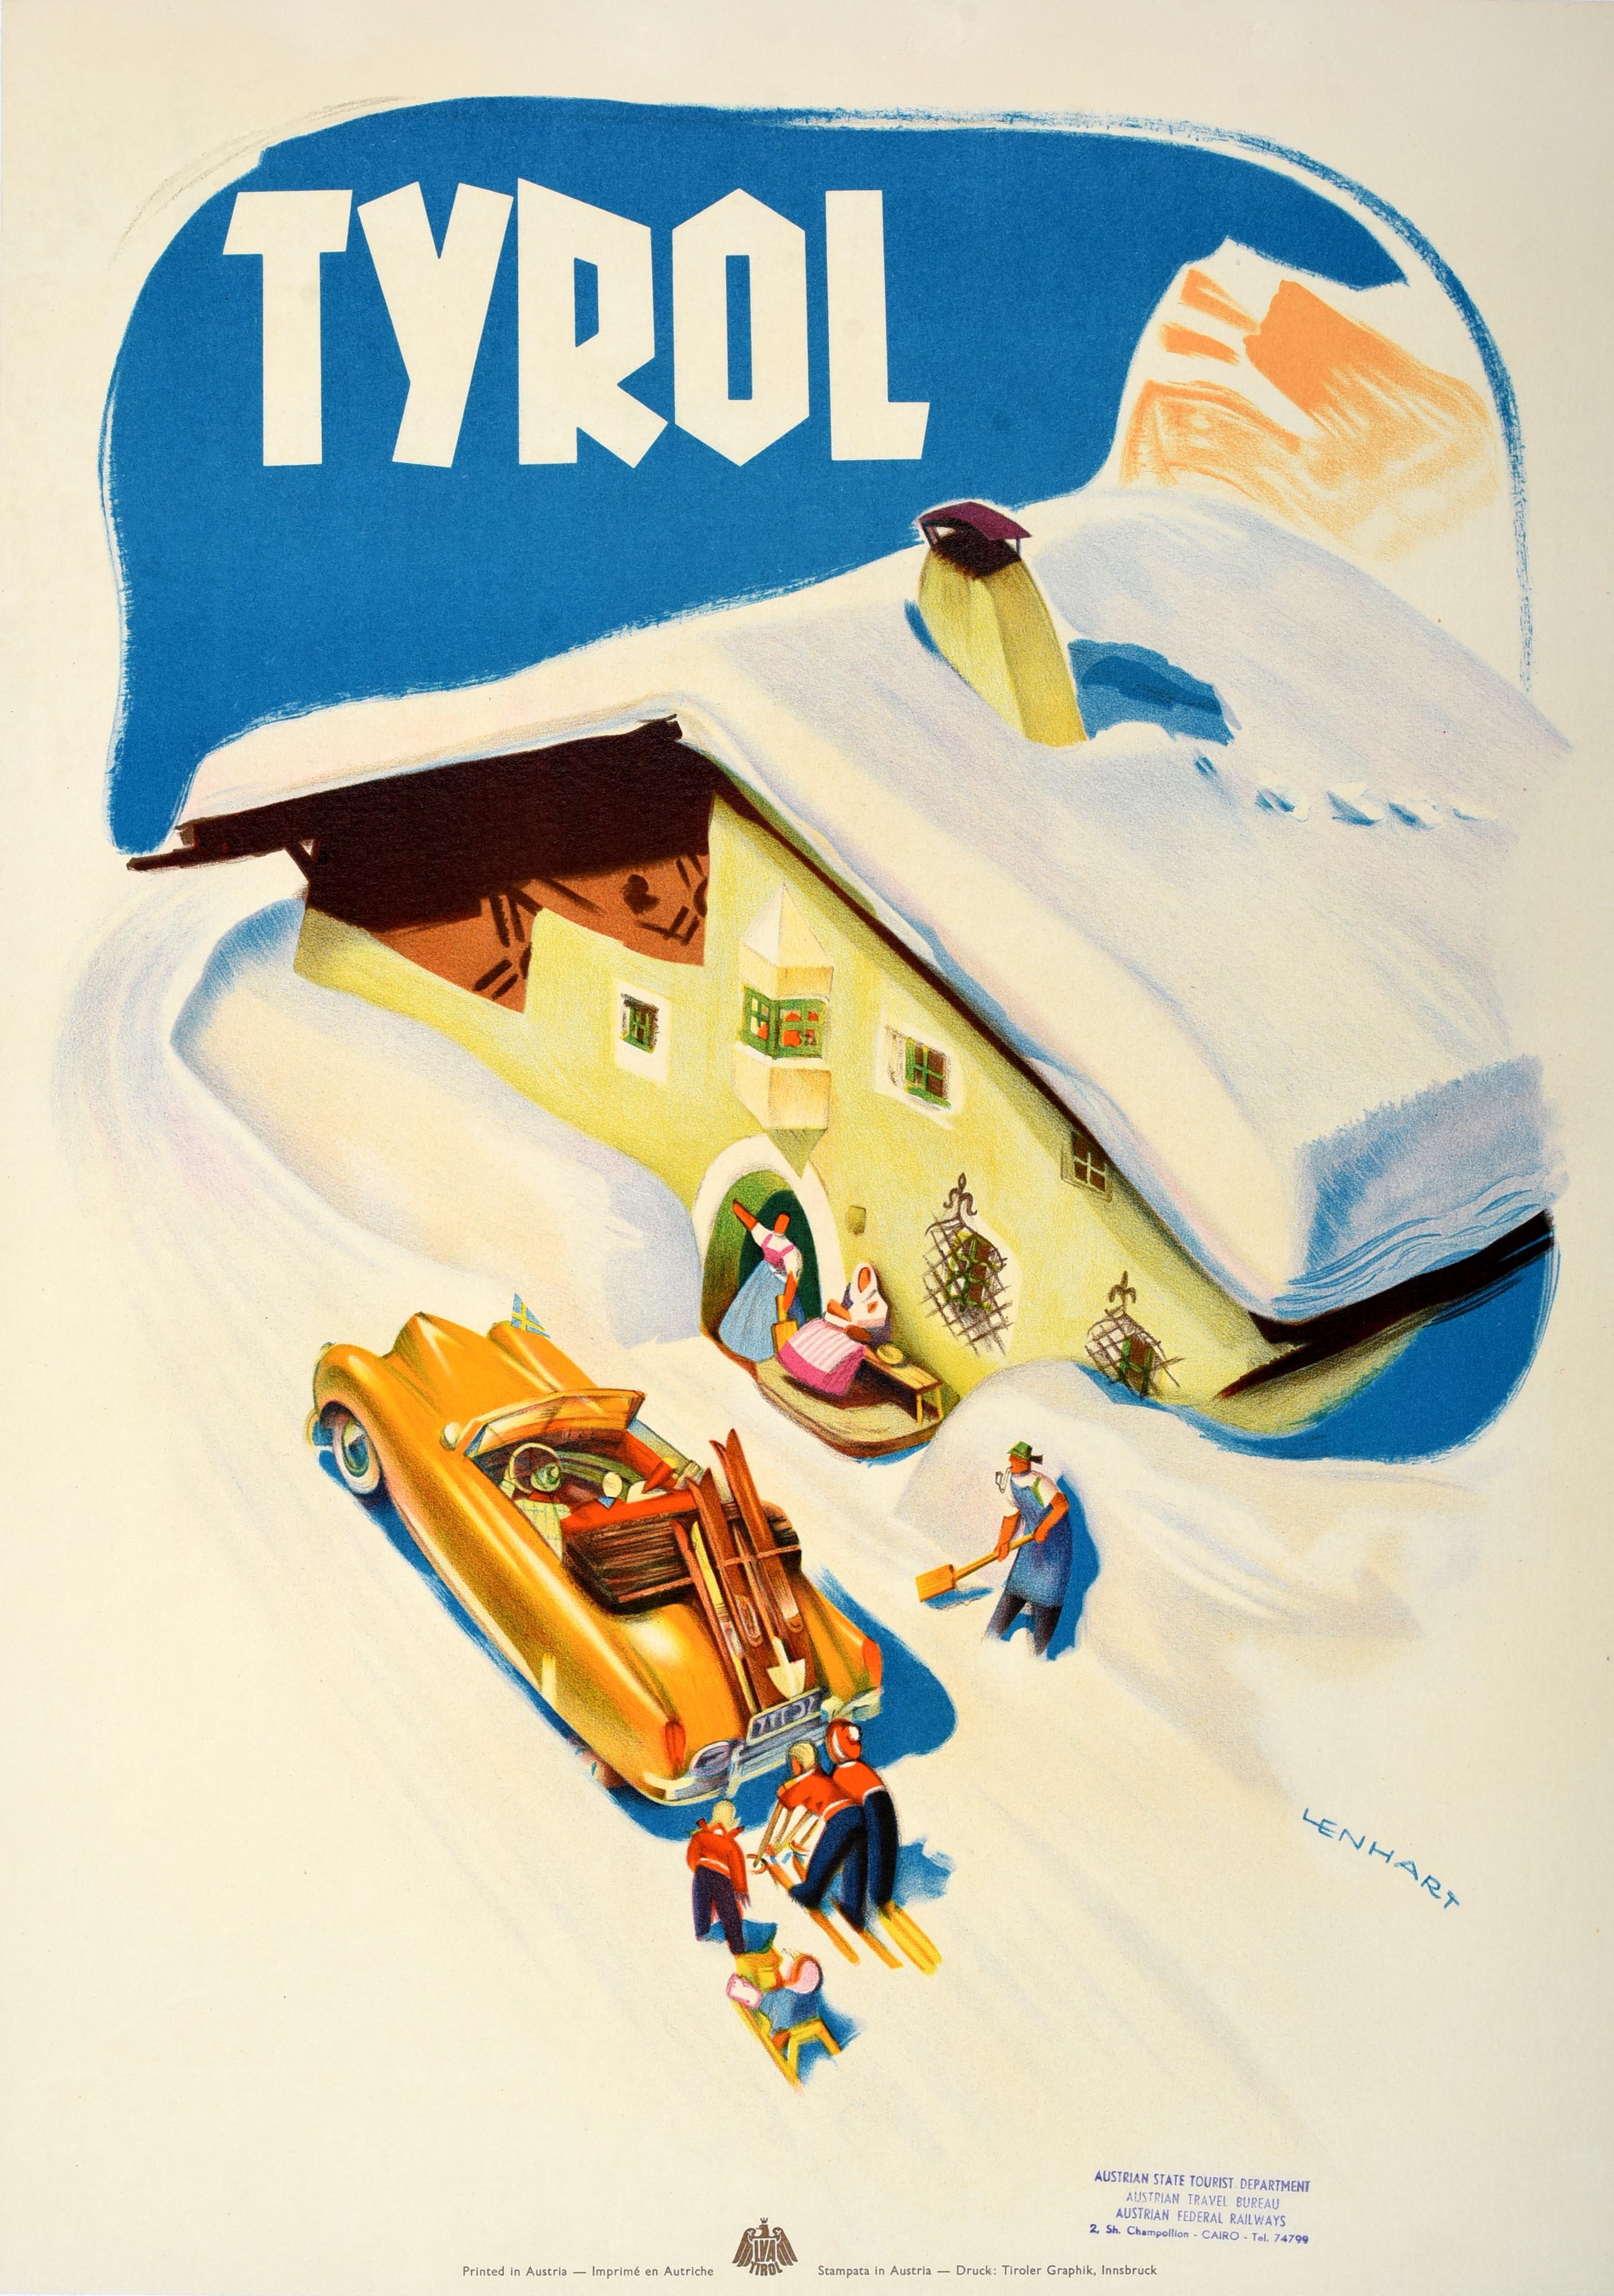 Original vintage winter travel poster for Tyrol featuring fun artwork by Franz Lenhart (1898-1992) depicting a couple in a smart yellow gold coloured car with a Swedish yellow and blue flag on the front of it parked by a snow covered chalet to ask